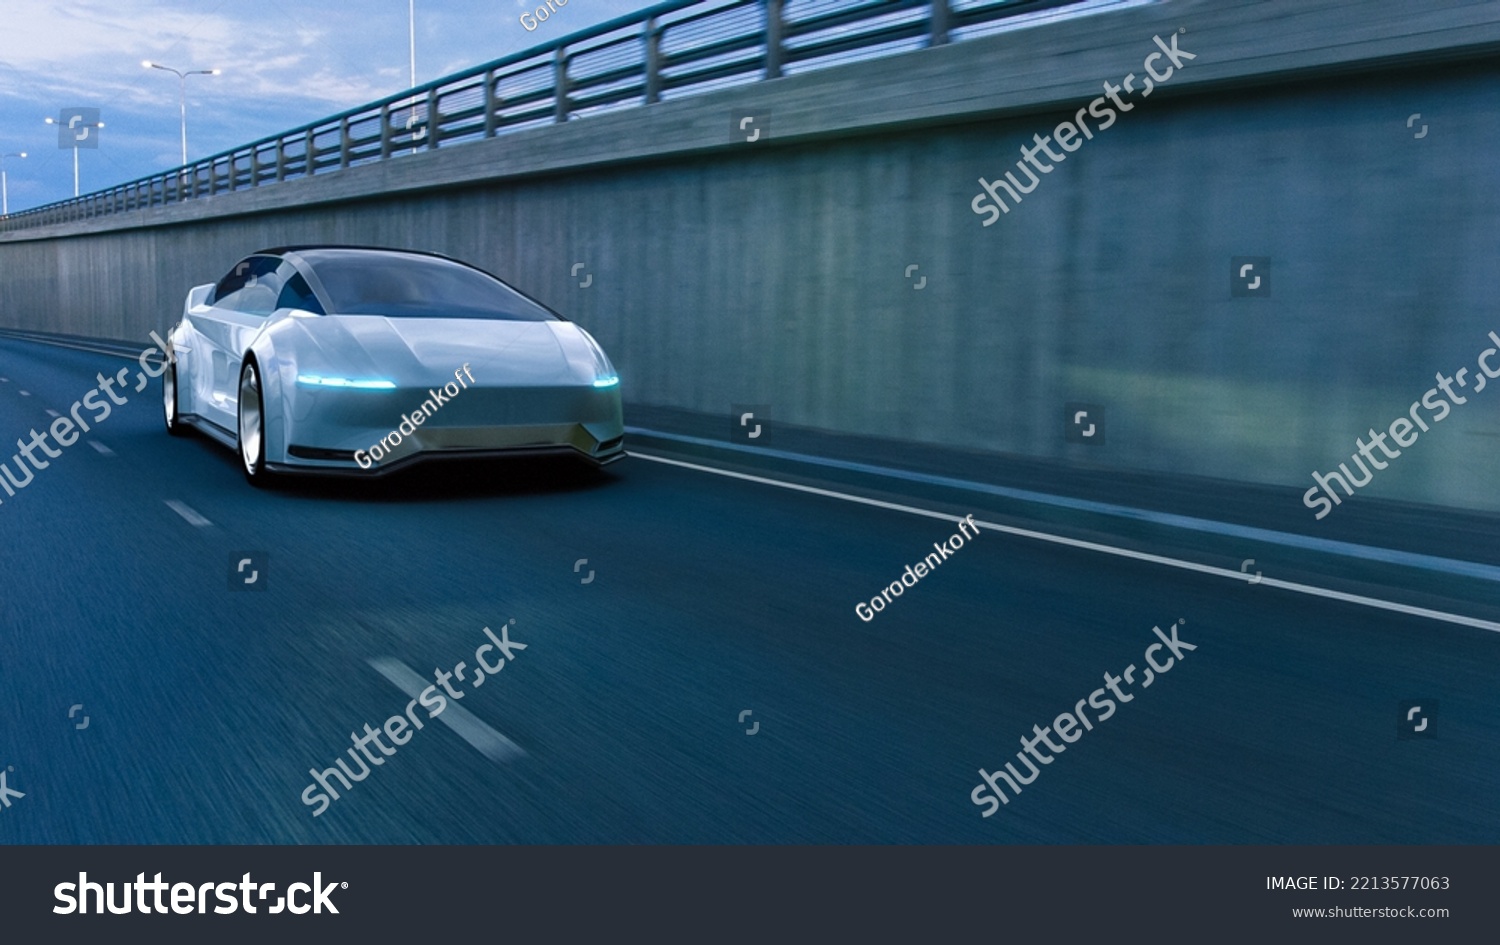 Autonomous Self-Driving 3D Car Moving Through City Highway. VFX Visualization Concept: Sensor Scanning Road Ahead for Vehicles, Danger, Speed Limits. Day Urban Driveway. Front Following View #2213577063